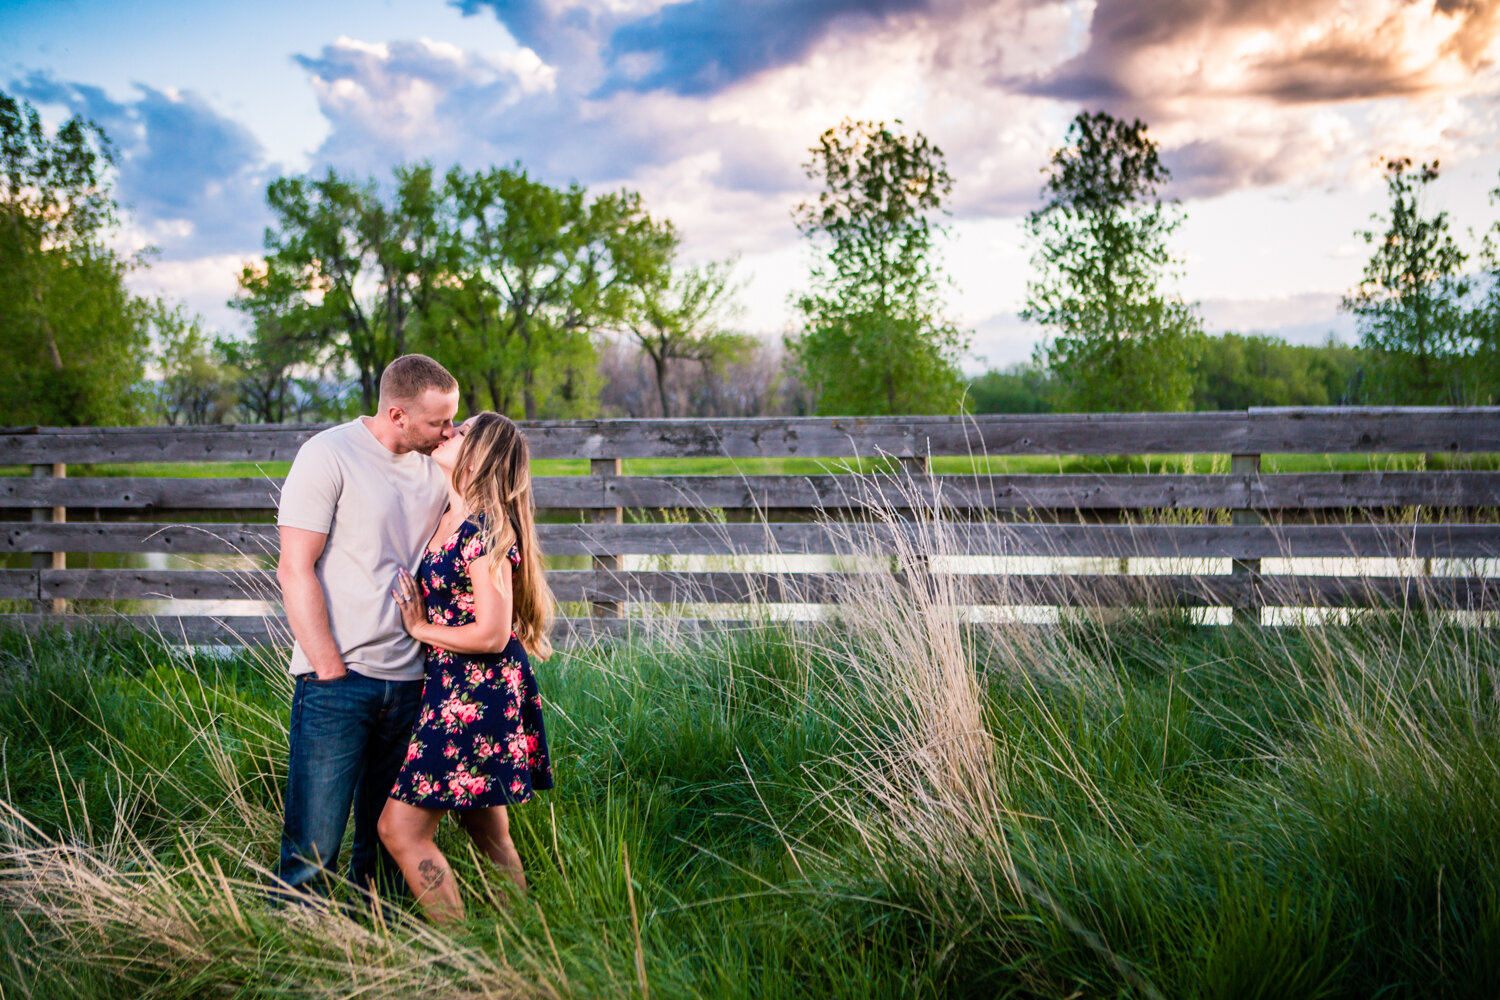  Engagement with a rustic fence at Sandstone Ranch. Take by Jared M. Gant 